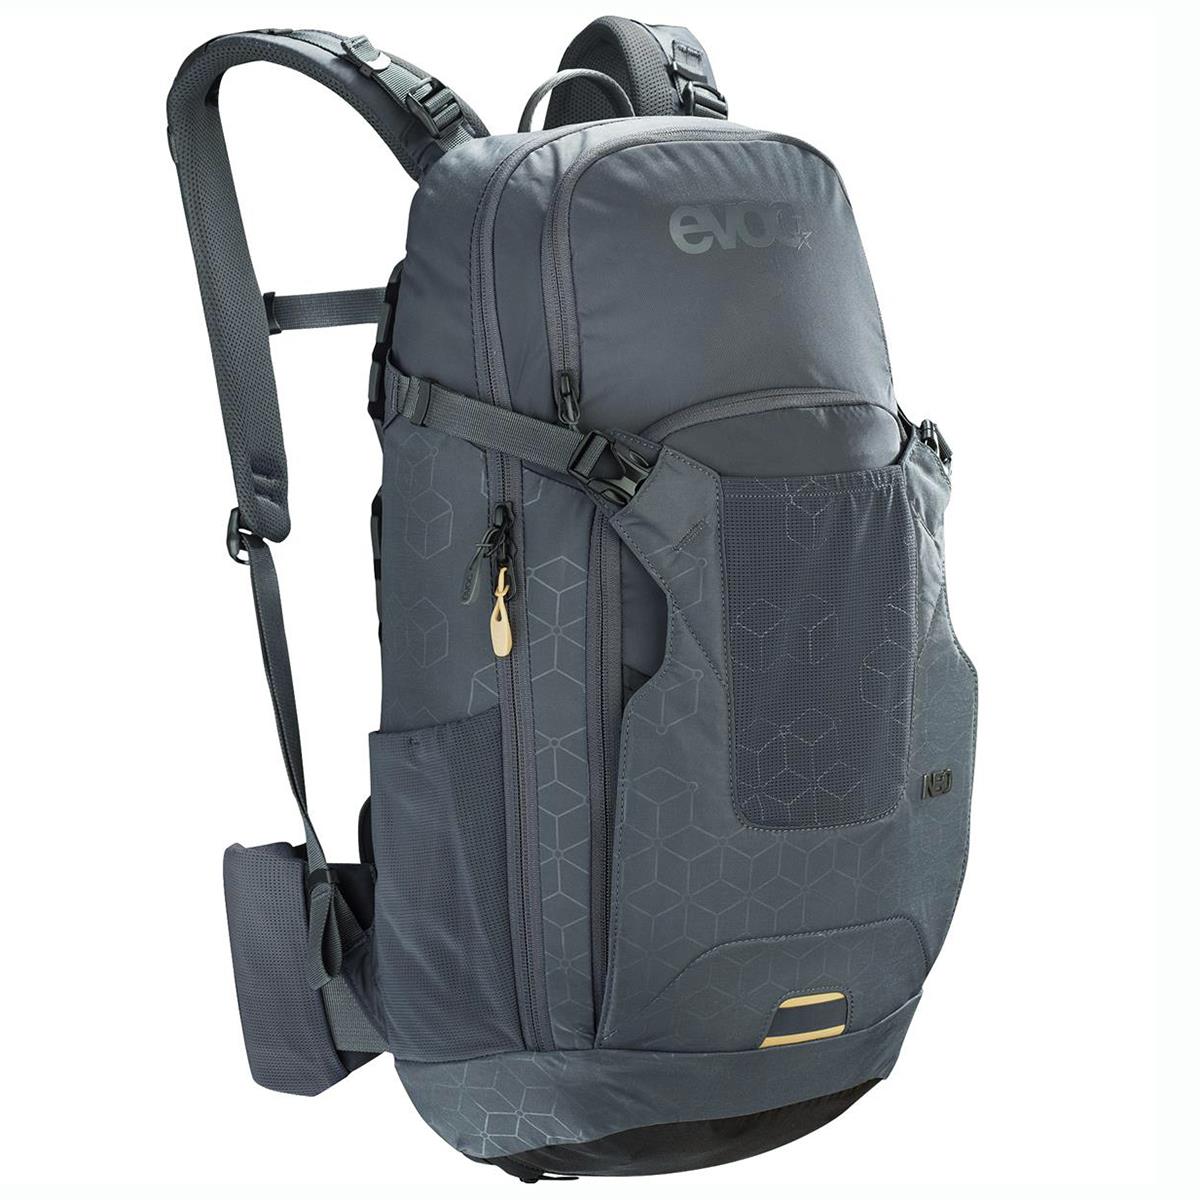 Evoc Protector Backpack Neo 16 L 16L - Gray